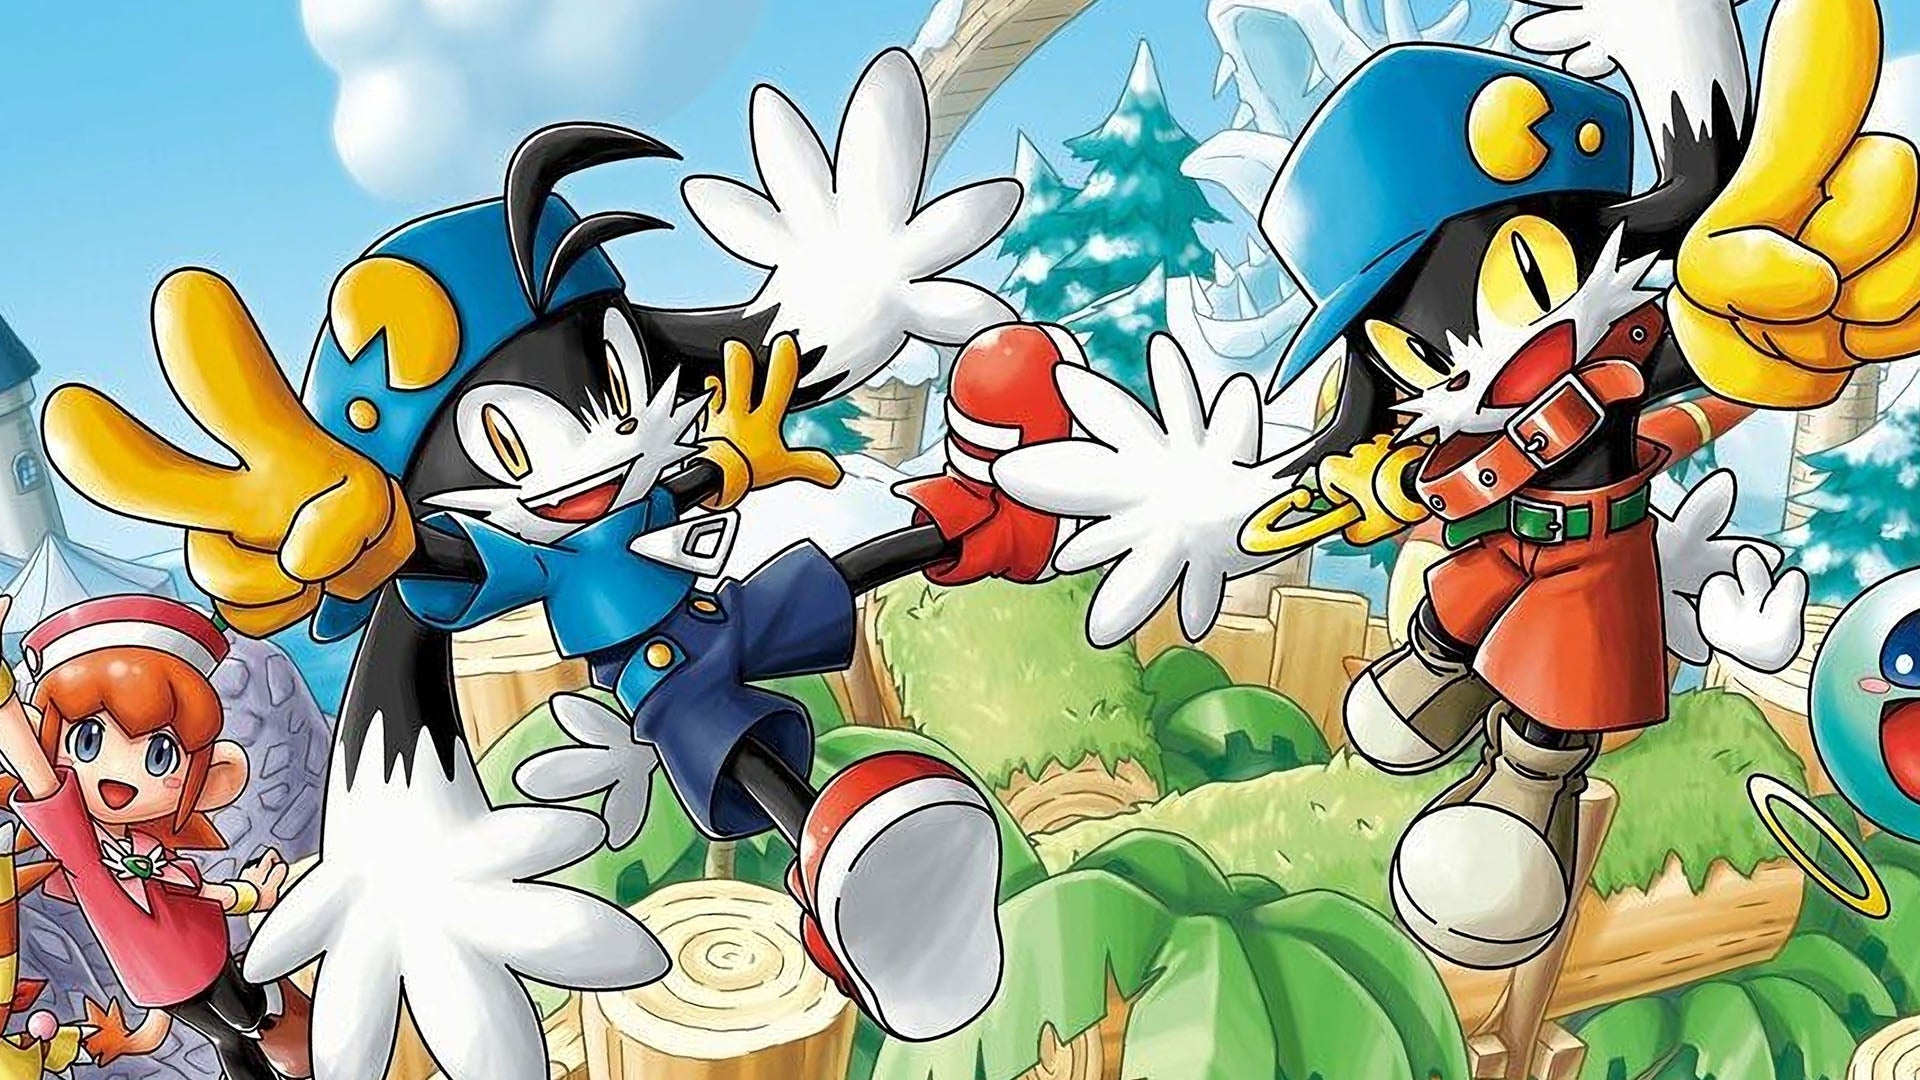 Image for DF Retro: The Klonoa Saga - Every Game Reviewed - Part 1: The 90s